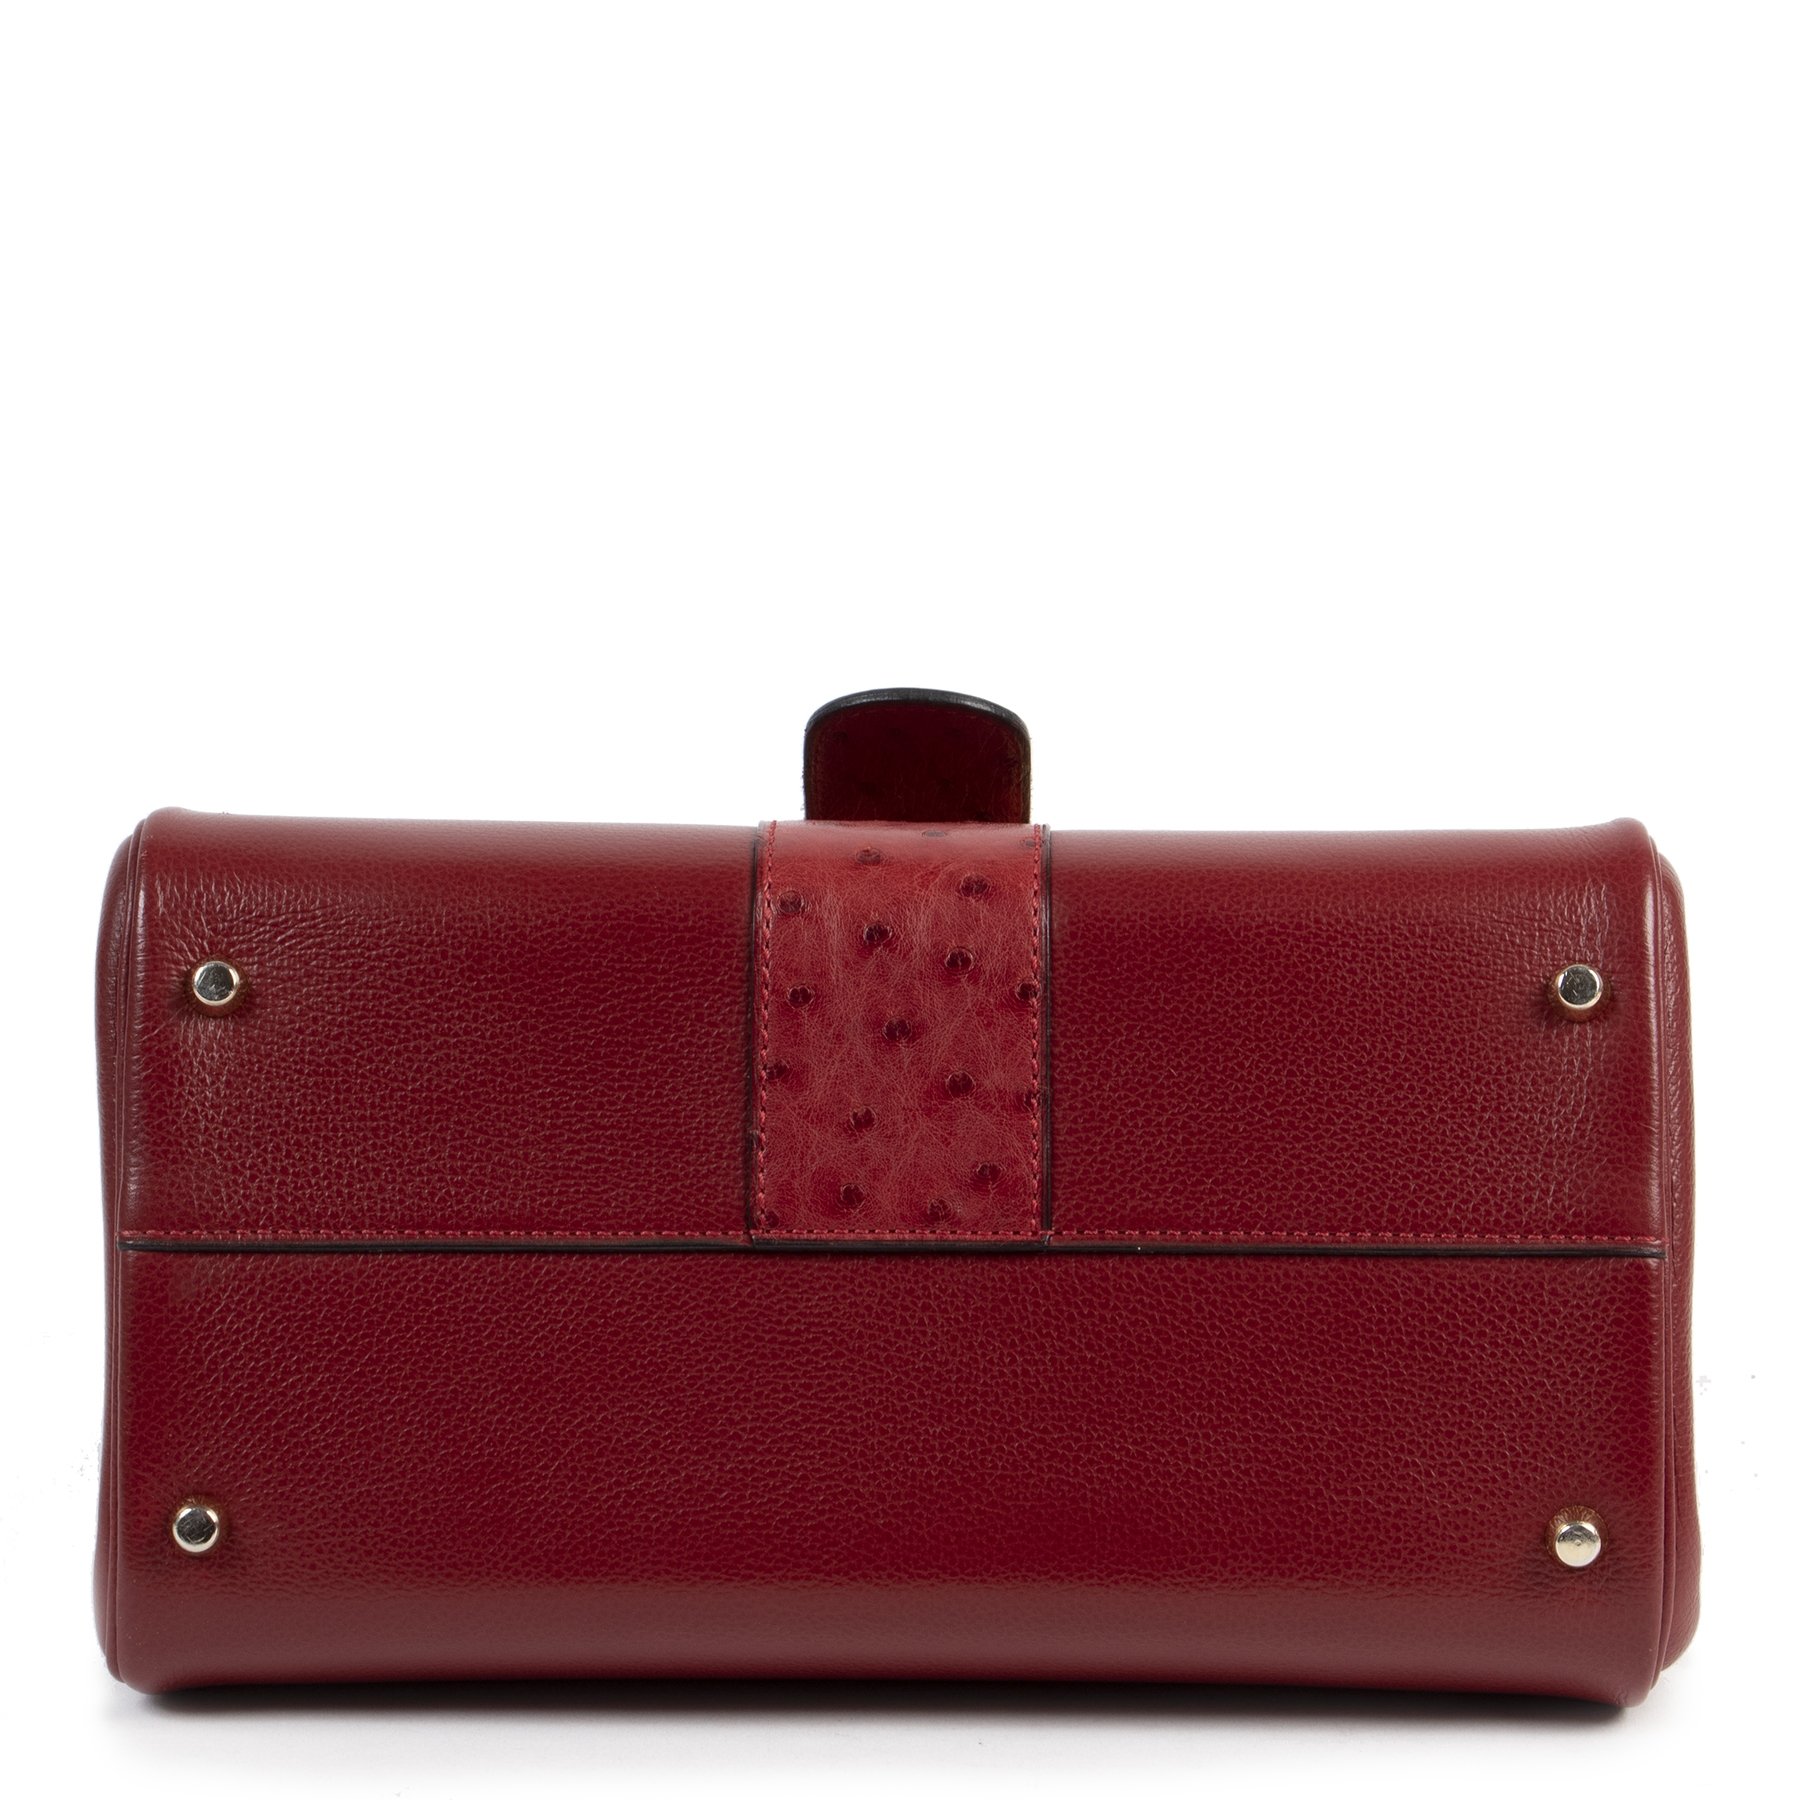 AS NEW Delvaux Brillant PM ostrich at 1stDibs